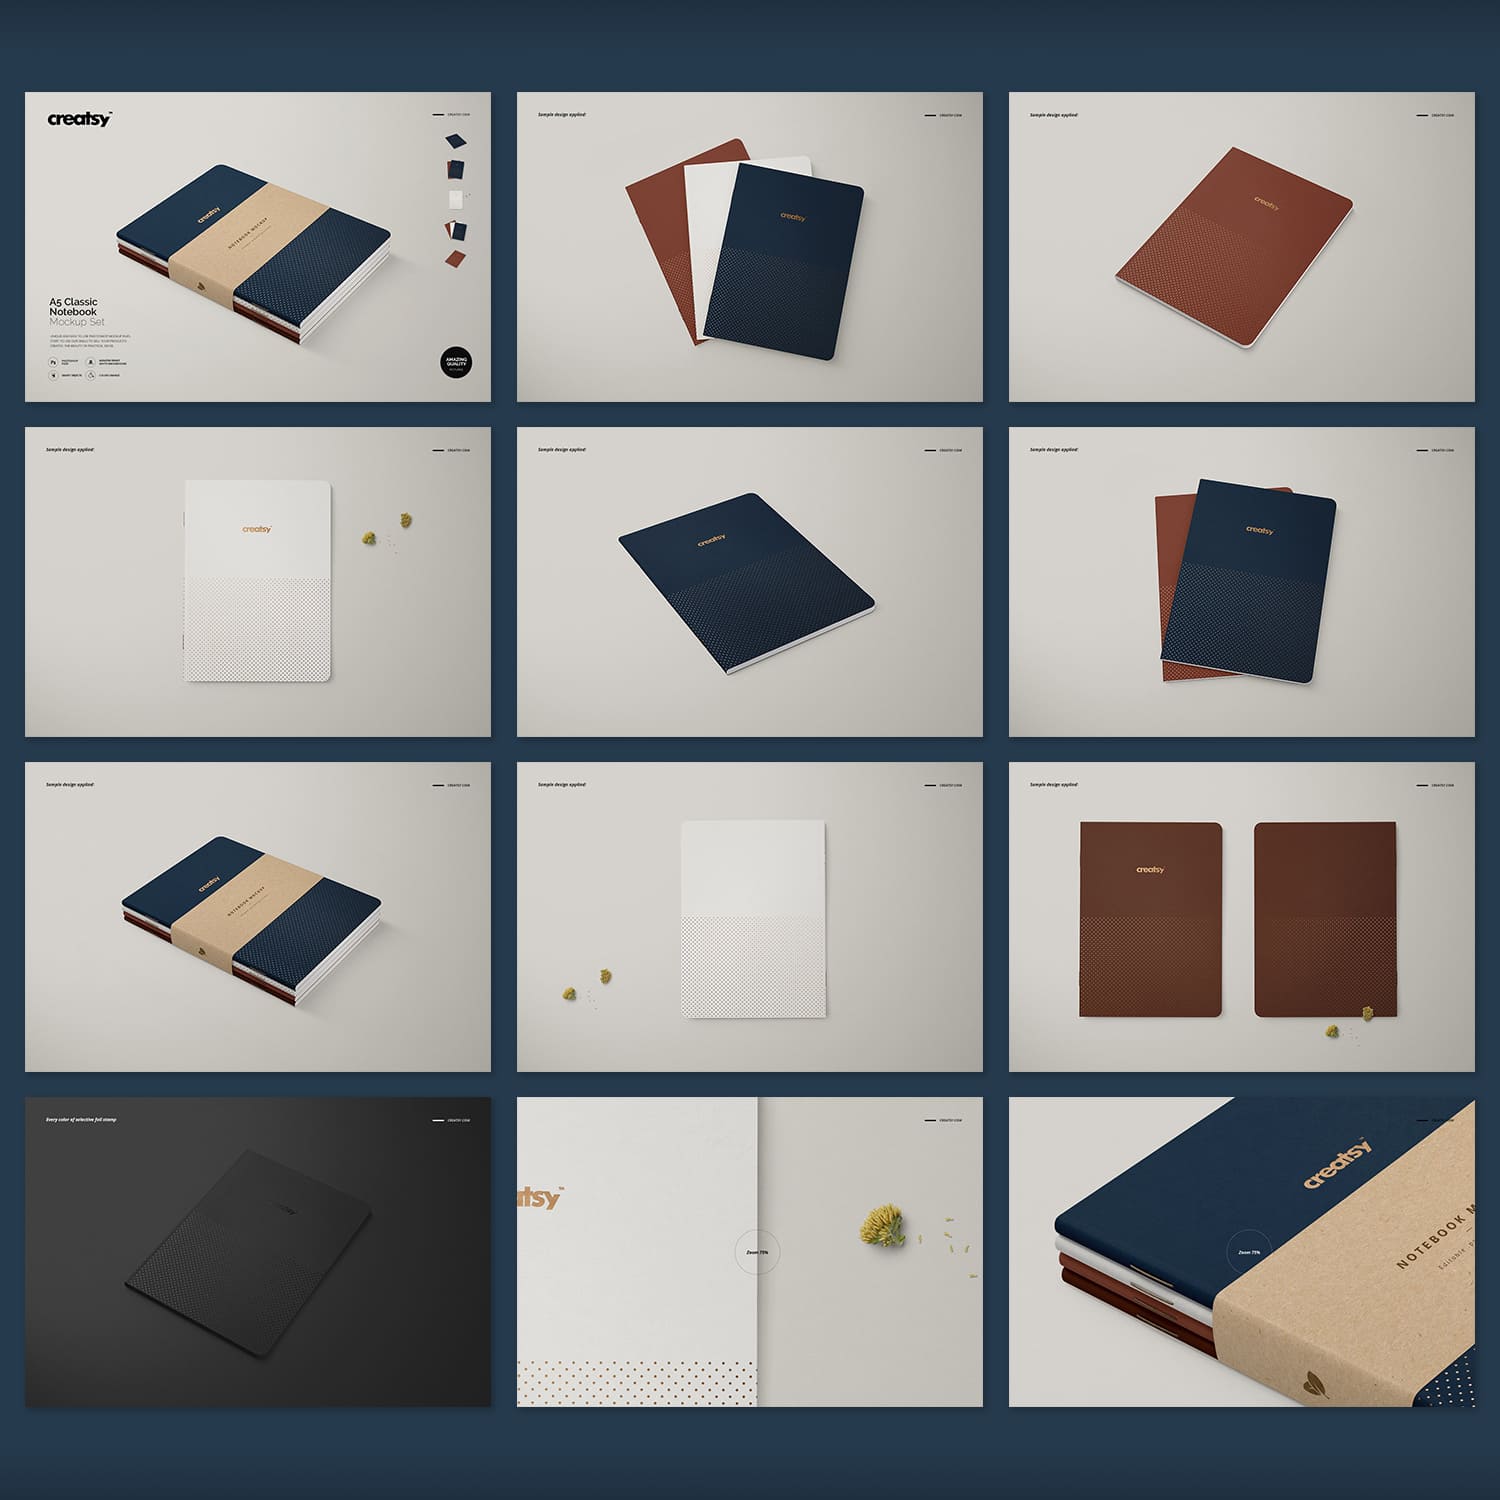 A set of A5 classic notebook images with great designs.